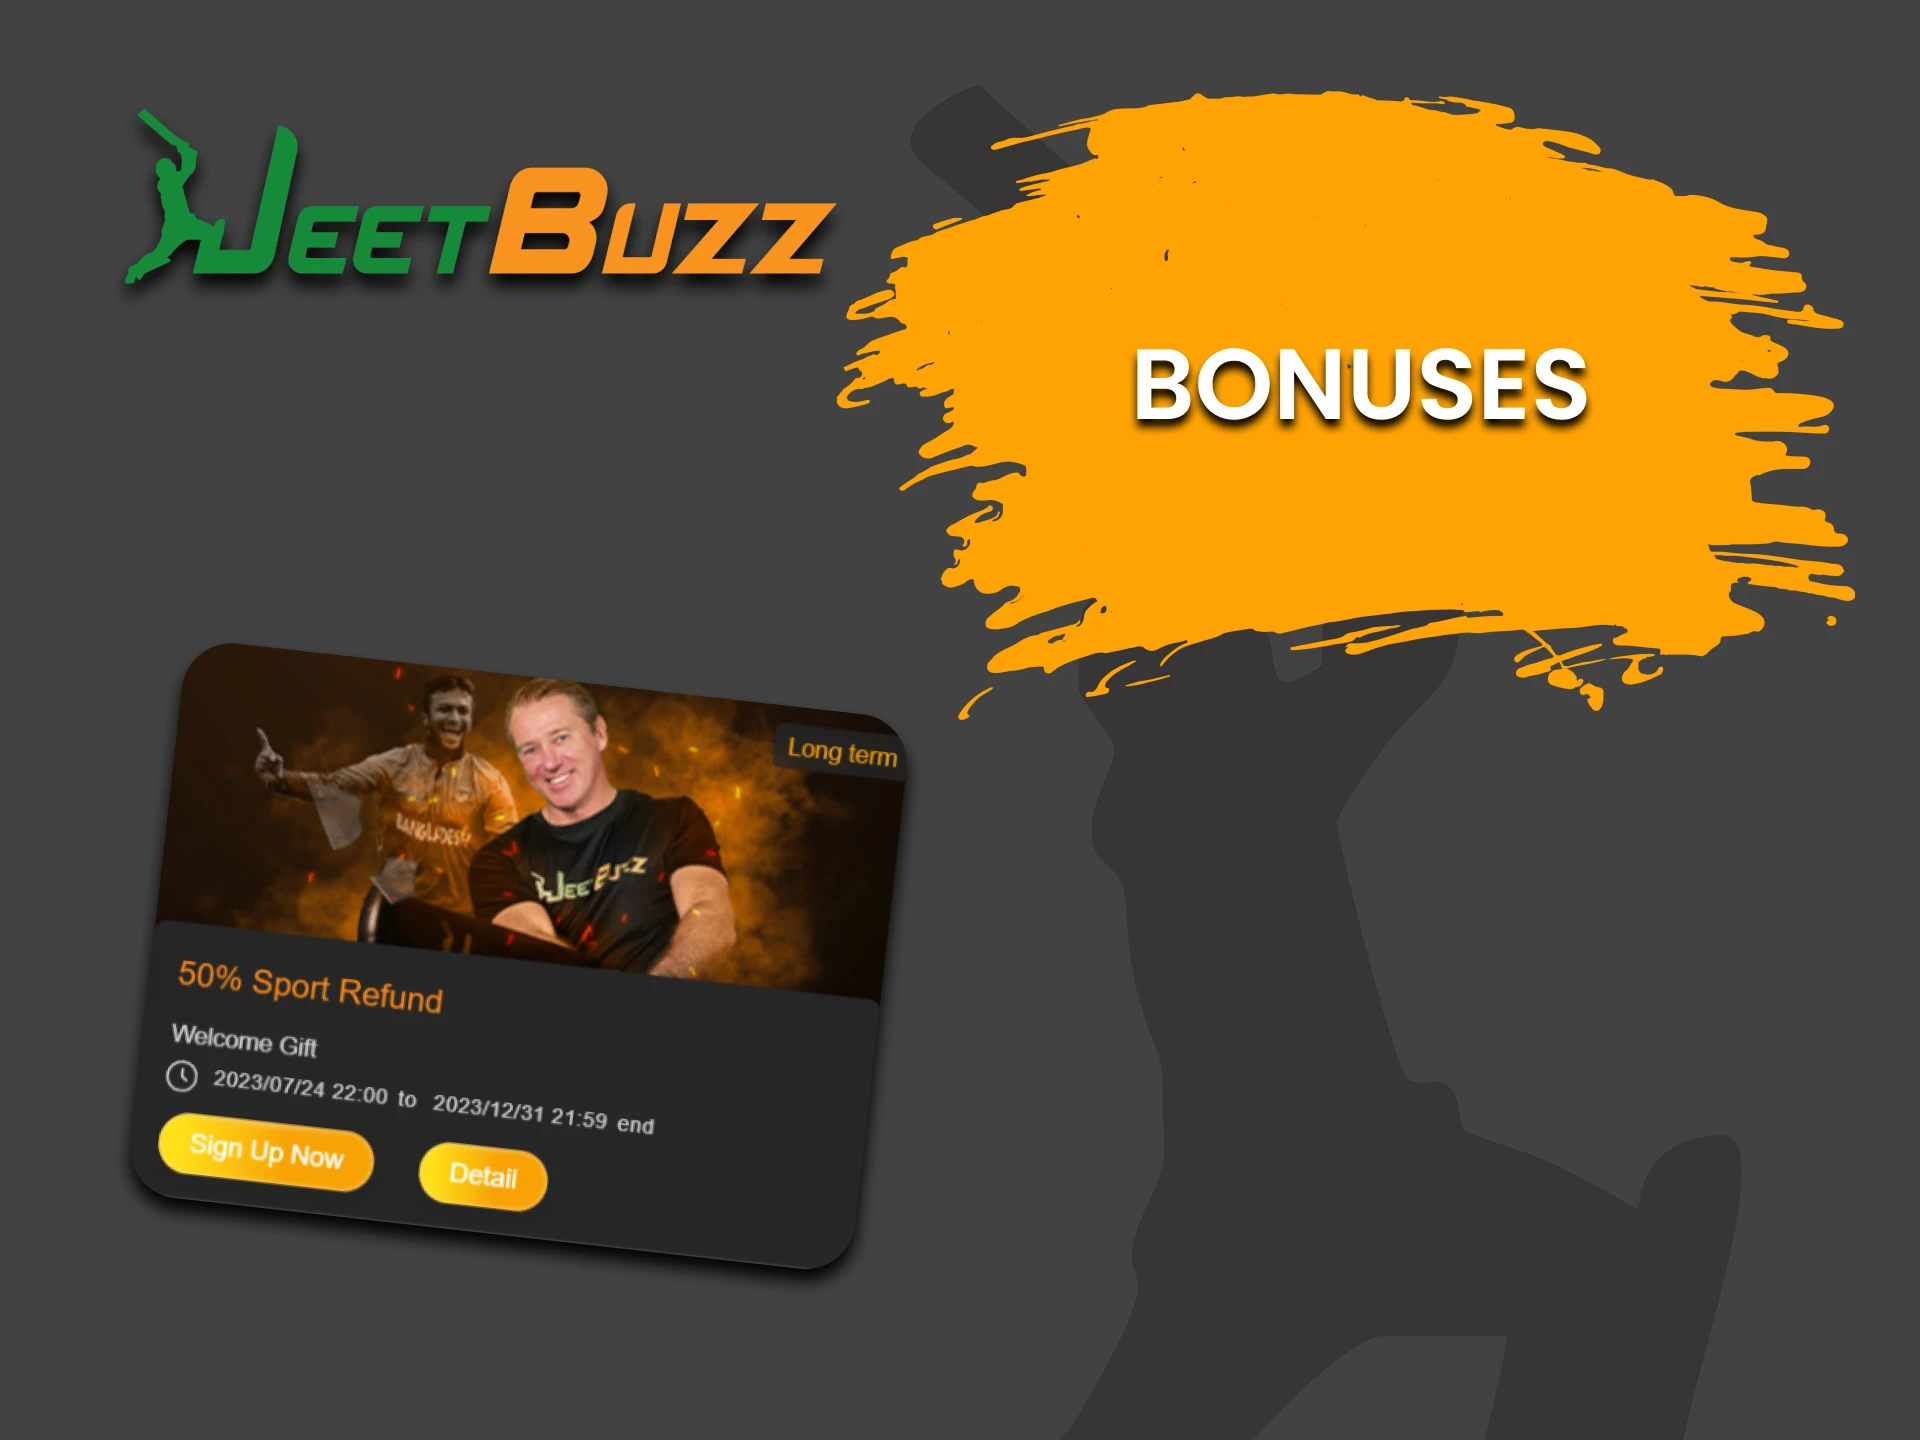 JeetBuzz gives bonuses for virtual sports betting.